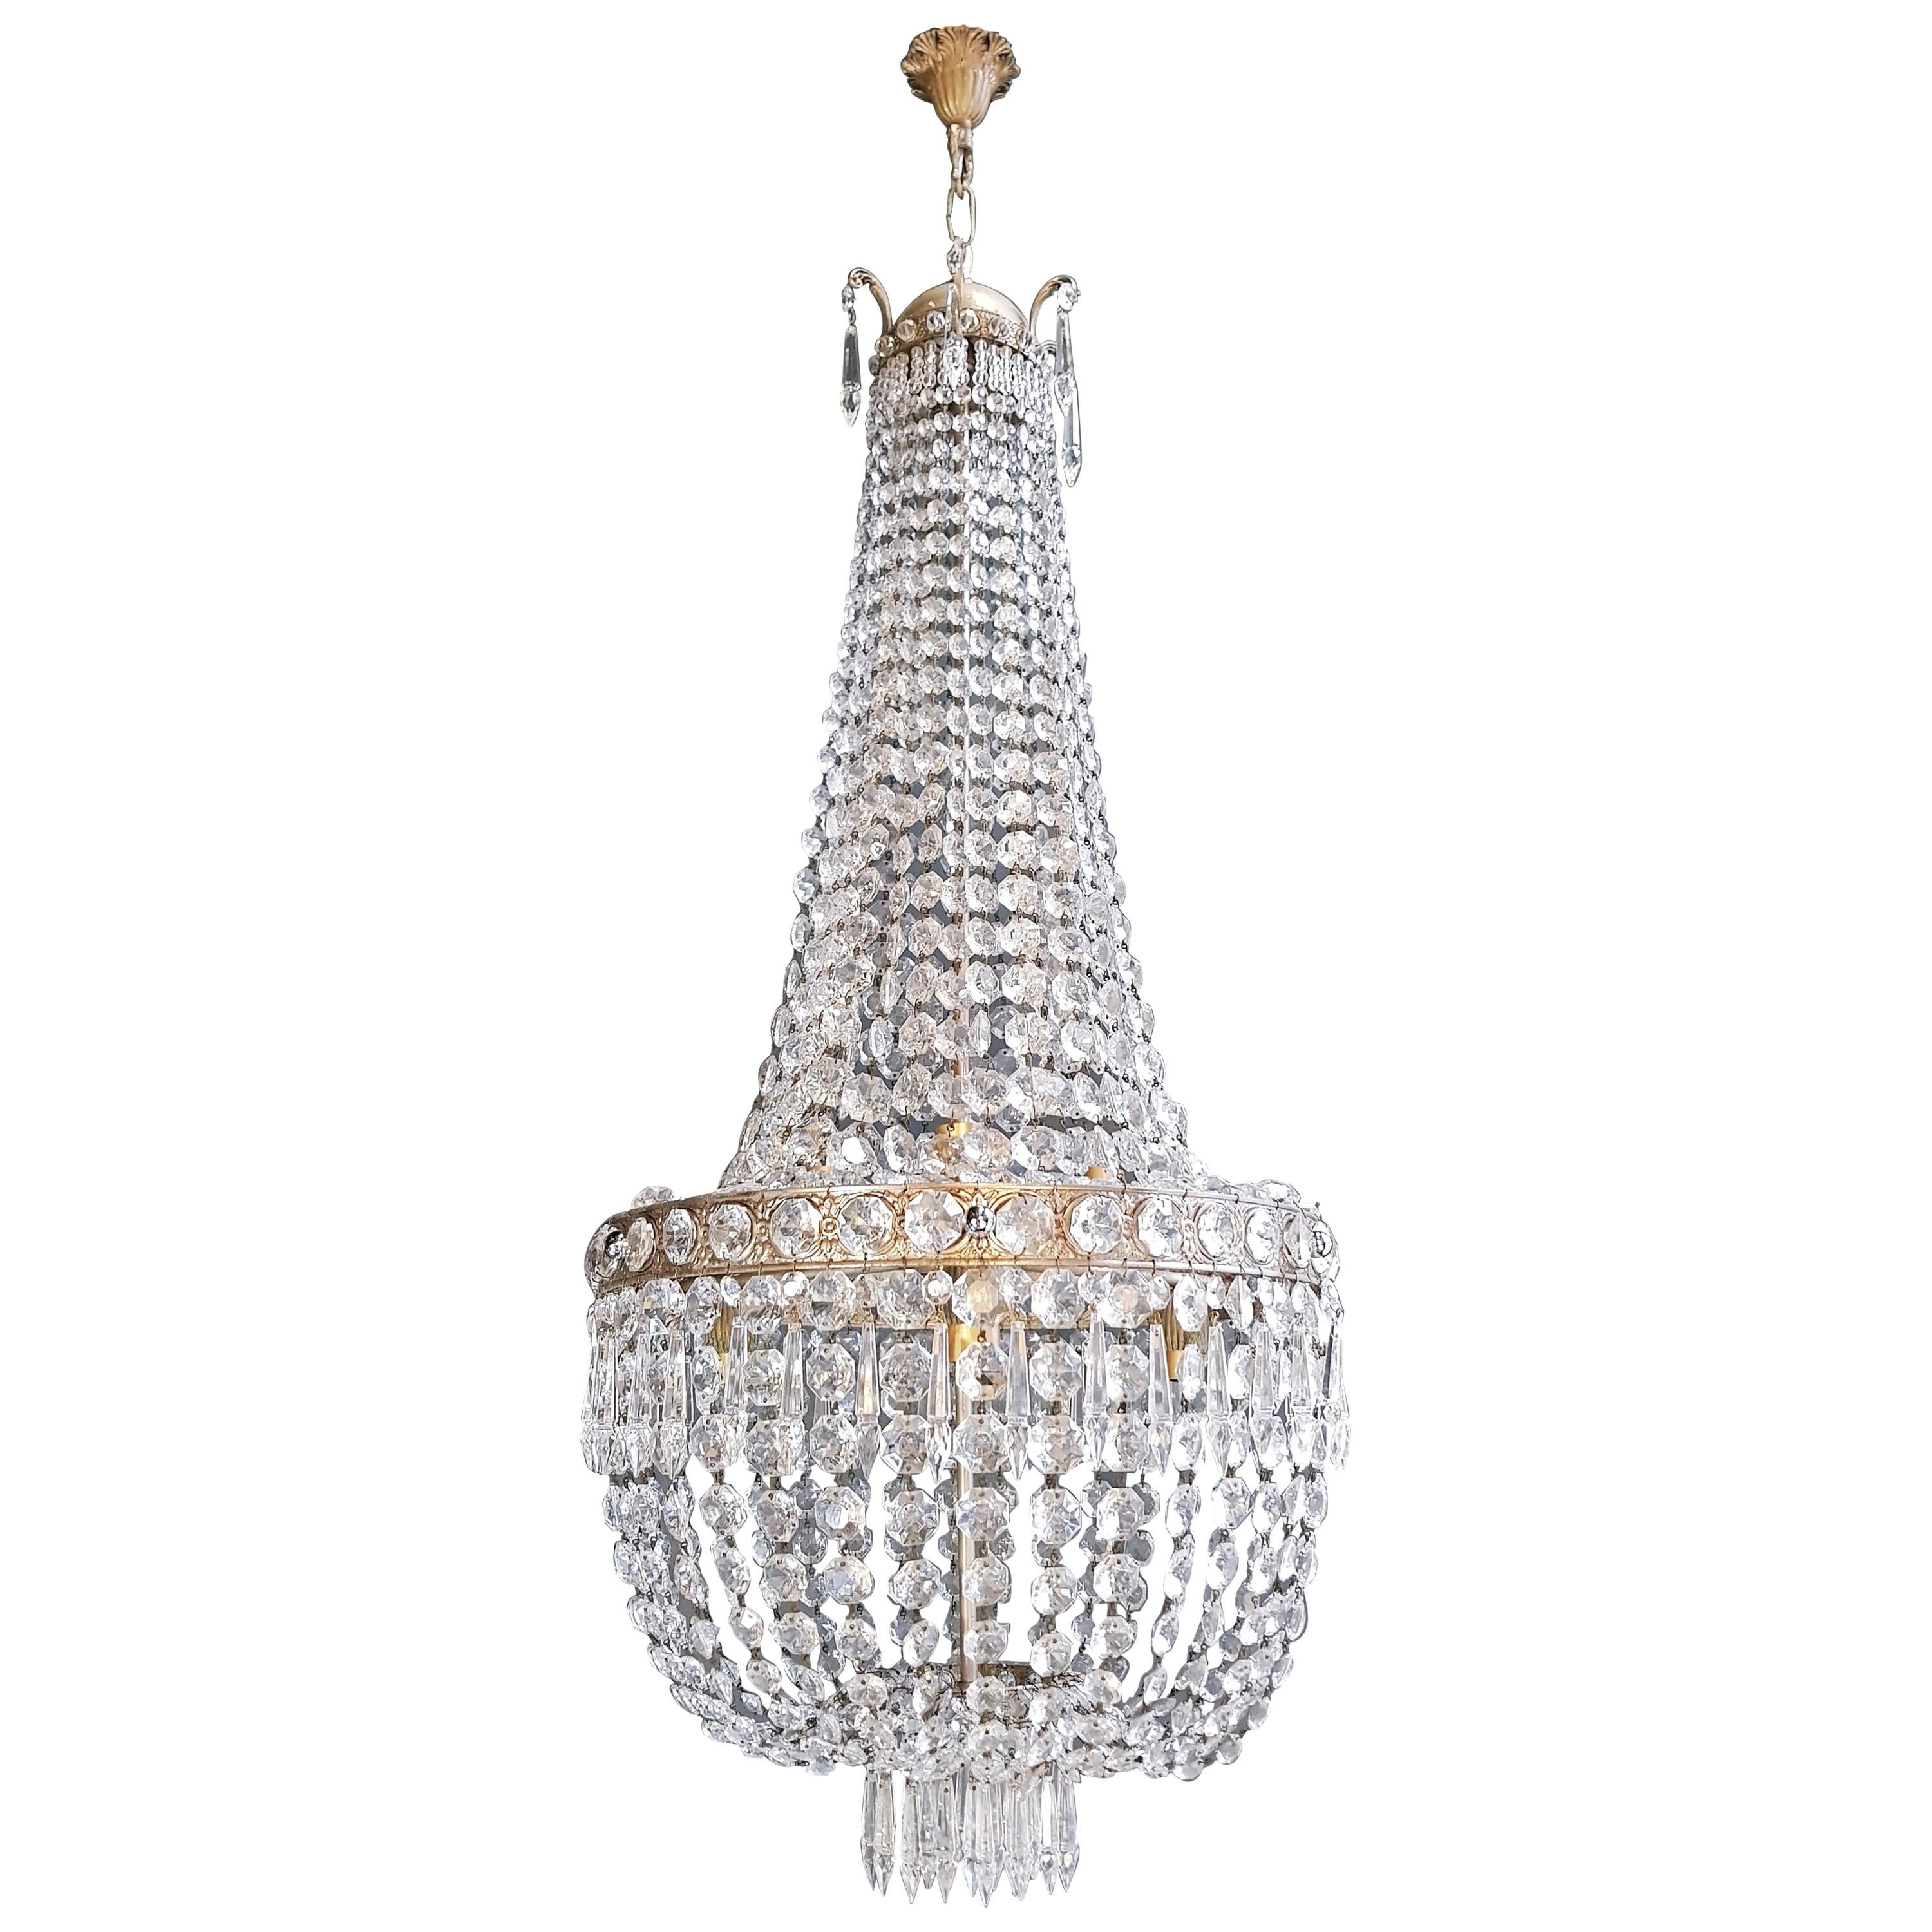 Montgolfièr Empire Sac a Pearl Chandelier Crystal Ceiling Lamp Pendant Lighting